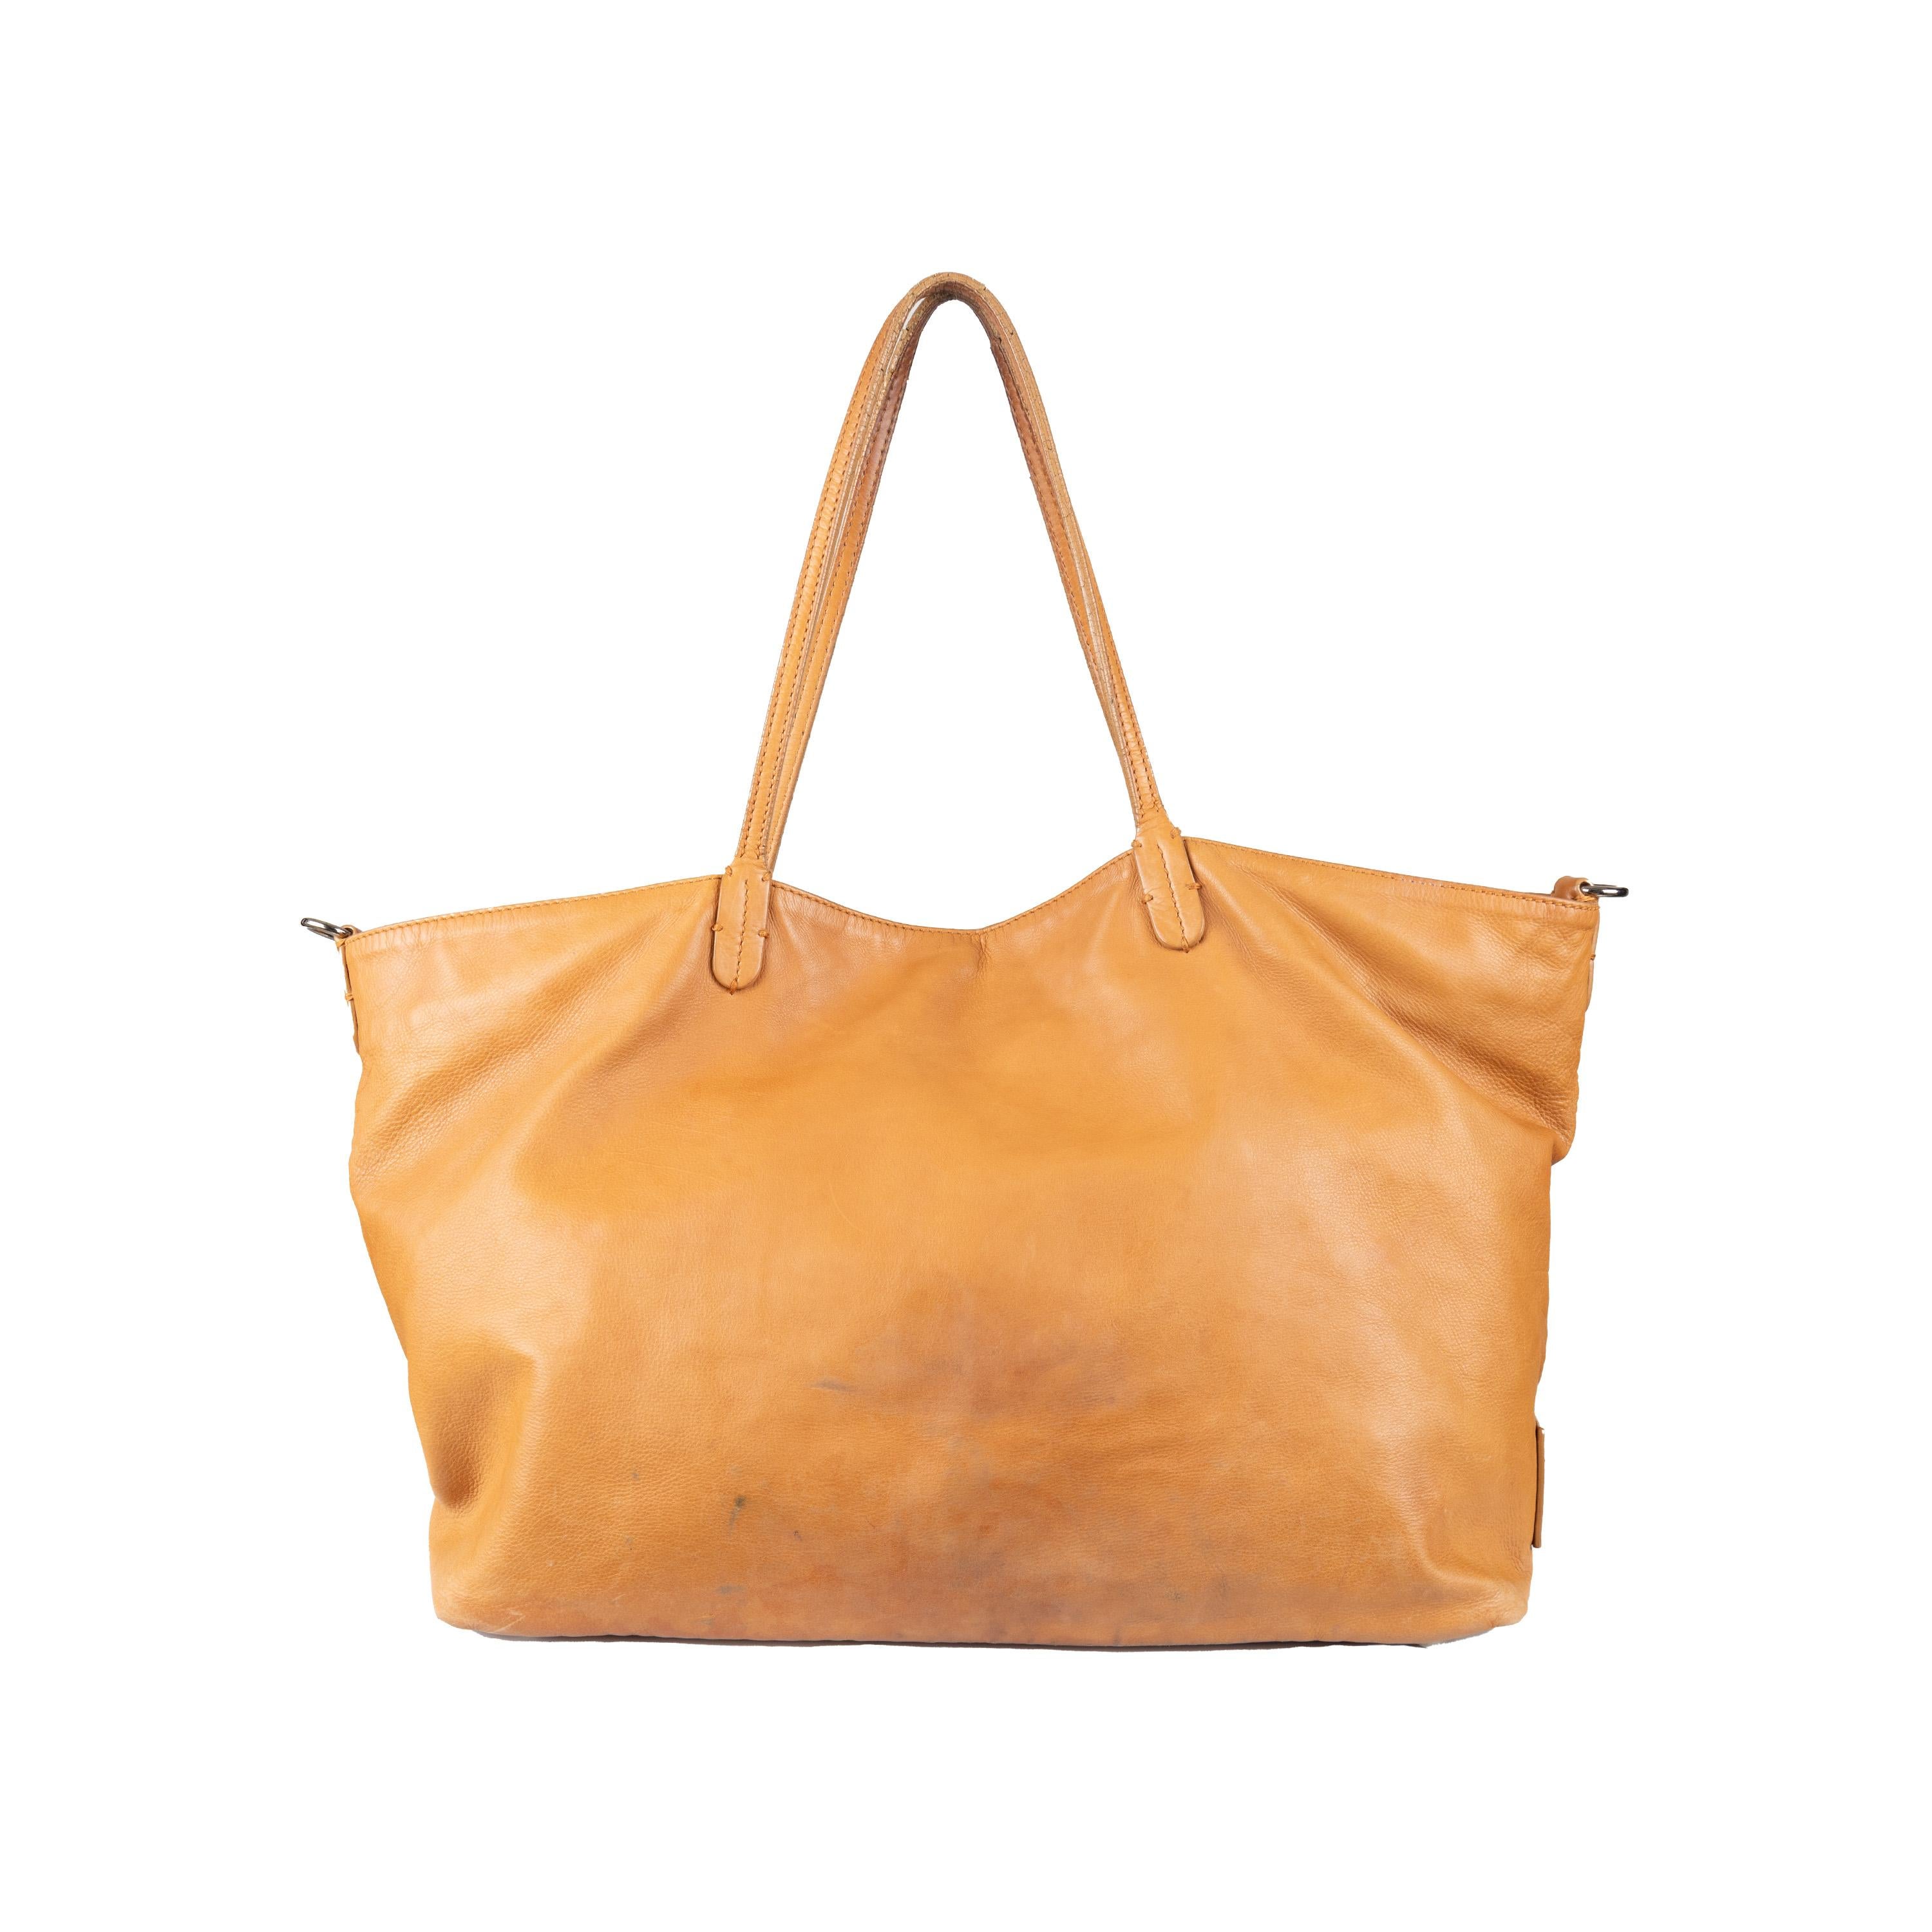 Elevate everyday style with the Valentino Petale Tote Bag. Crafted from luscious tan brown leather, this chic tote features a delicate petal design on the front and two top handles. With a large storage compartment and magnetic snap closure, this